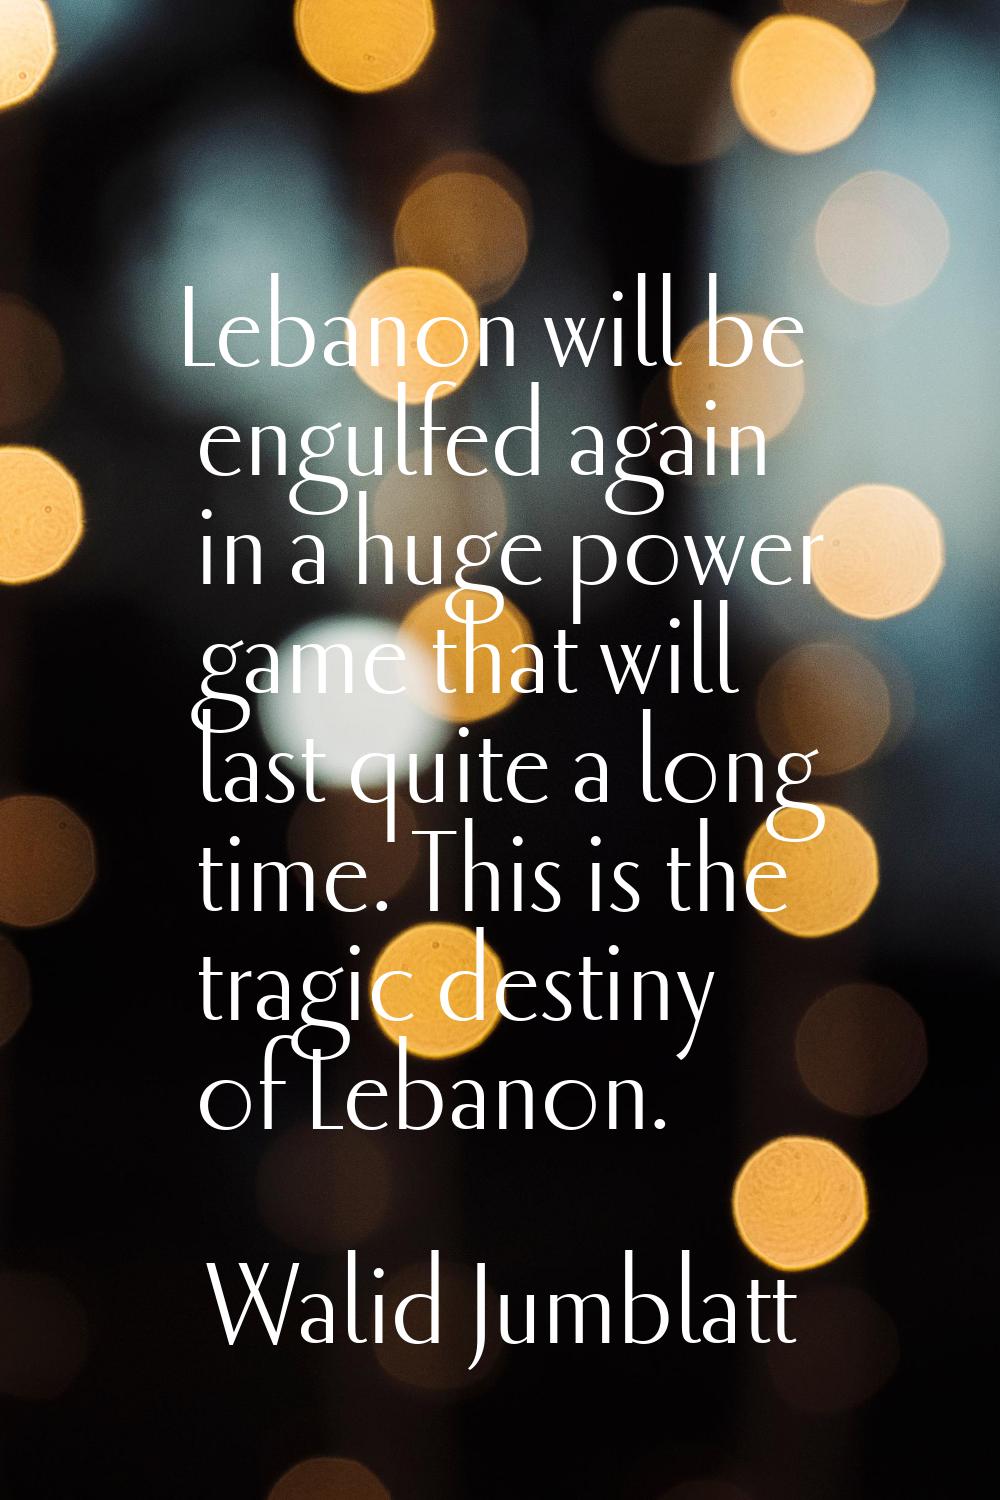 Lebanon will be engulfed again in a huge power game that will last quite a long time. This is the t